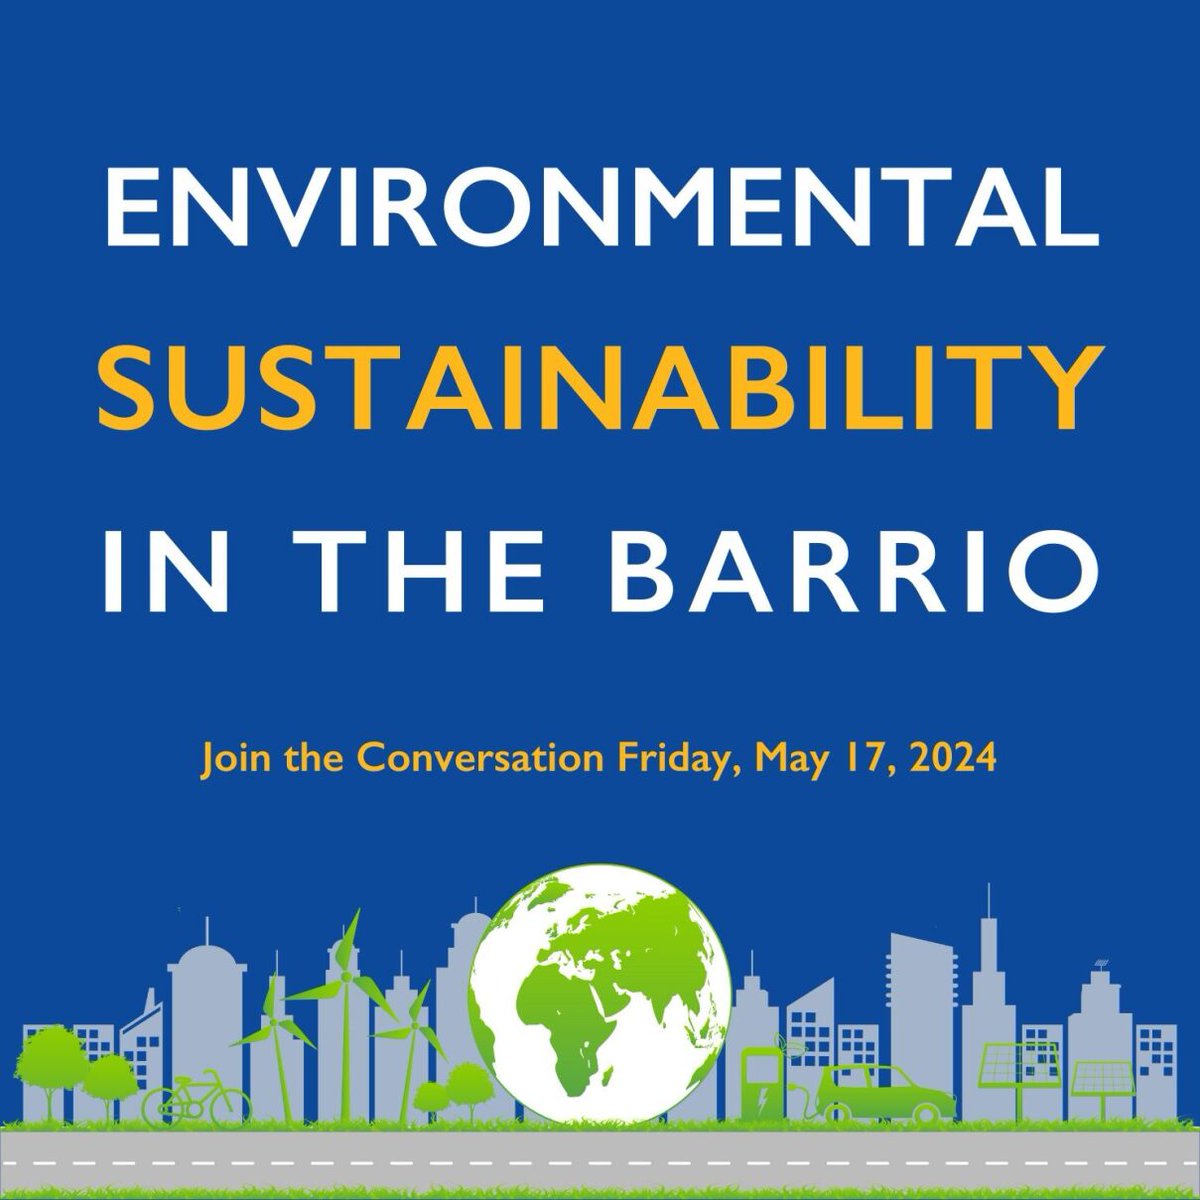 Join FHCSD for a rewarding afternoon of exploring Environmental Sustainability in the Barrio at #SOTB on May 17th from 11:30 a.m. - 1:00 p.m. We want to thank @CoxCalifornia, @LPAinc, @molinahealth and @aoreed for helping make this event possible. ow.ly/6zq250RCh3g